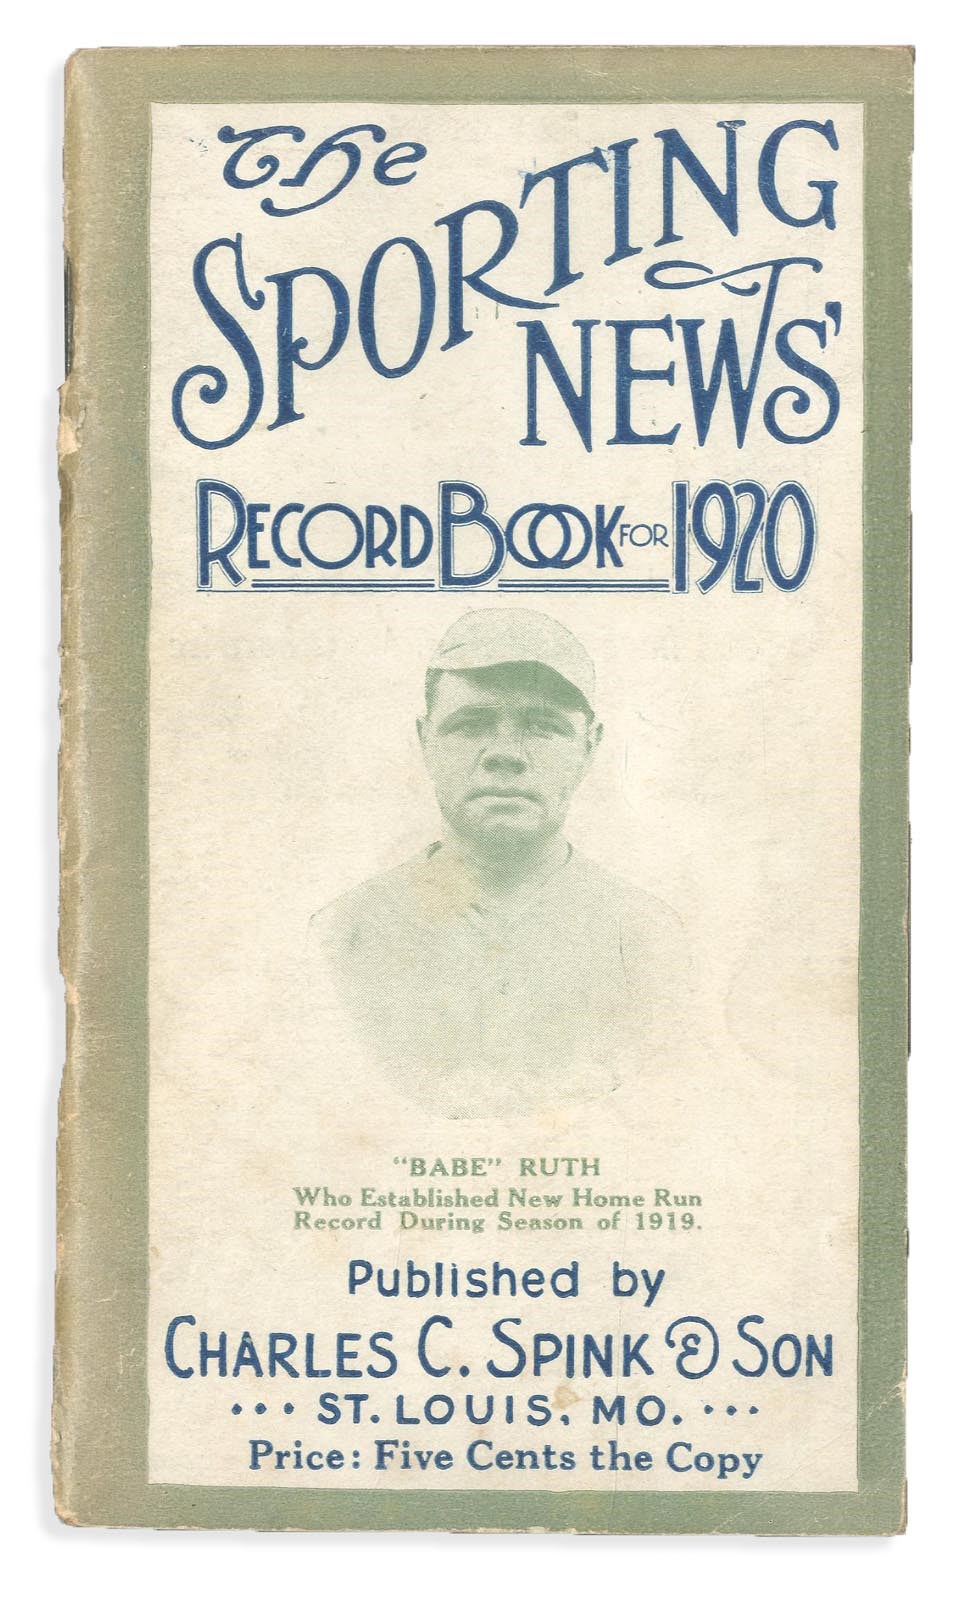 Ruth and Gehrig - 1920 Sporting News Record Book with Babe Ruth Cover